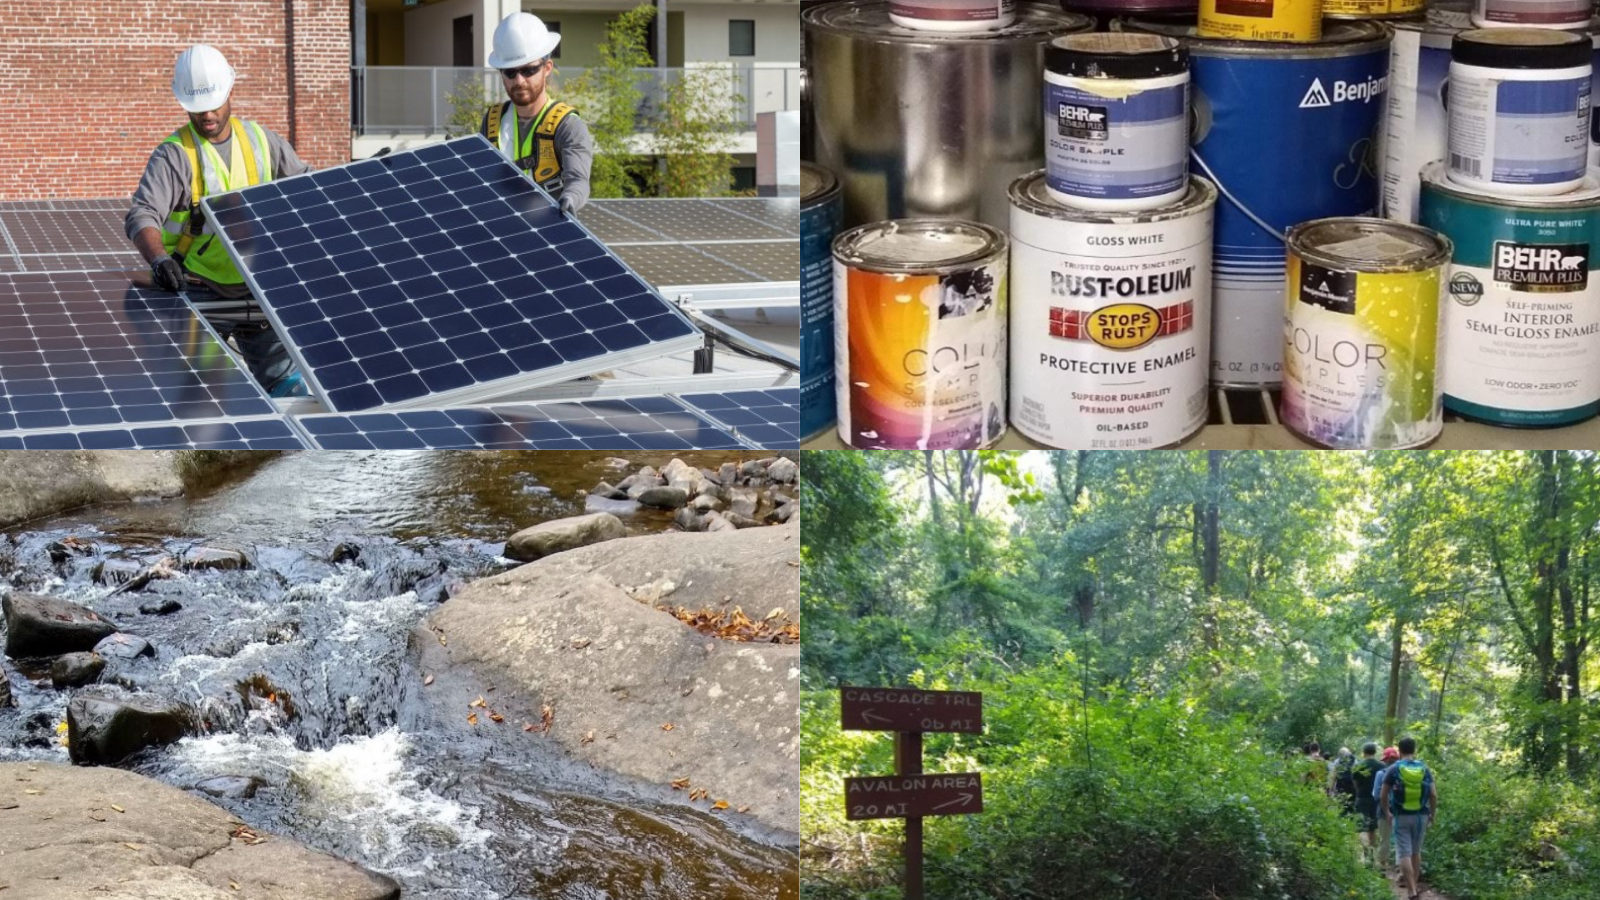 Image of solar panels, river, paint cans, and hiking trail